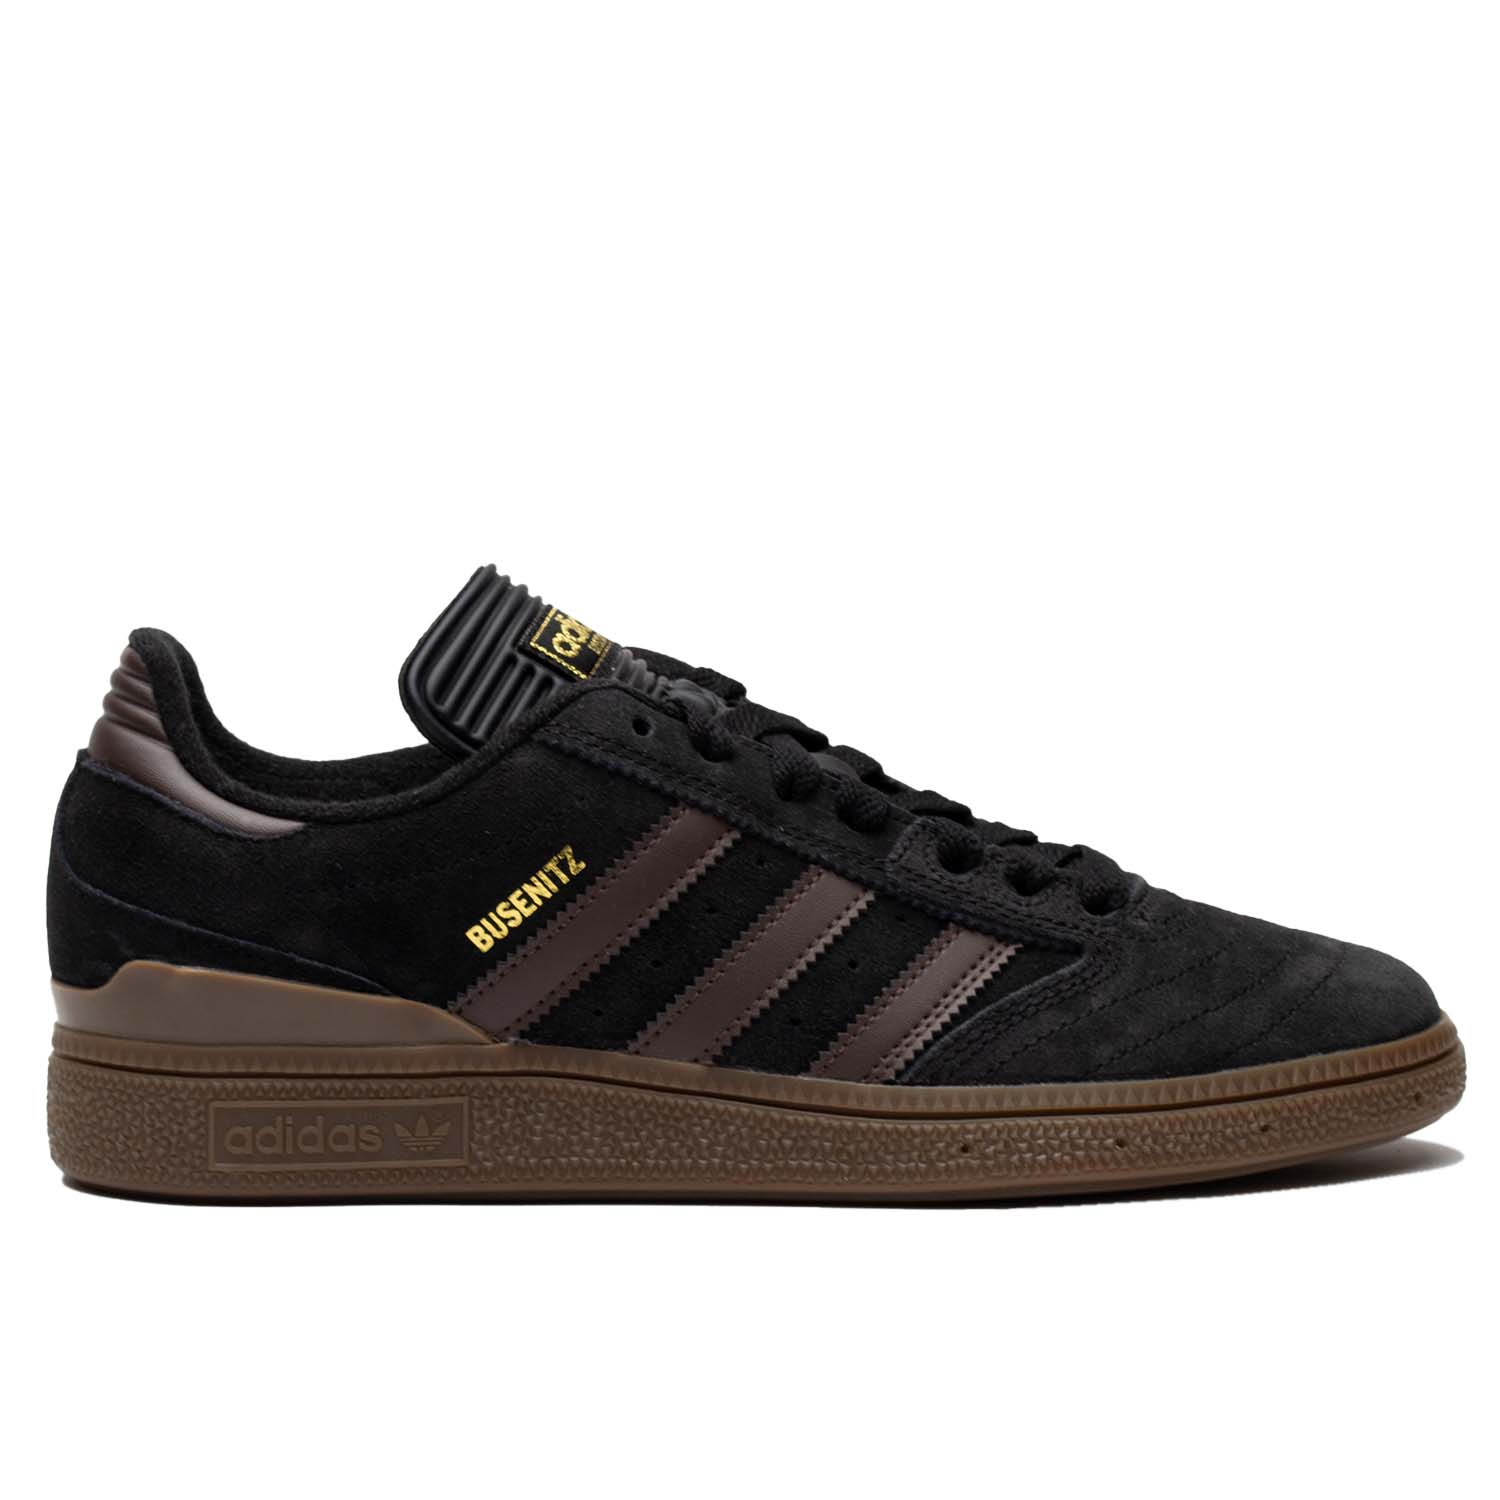  The adidas Action Sports and Dennis Busenitz partnership transforms the Copa Mundial football boot into reliable skate shoes, featuring a sturdy upper, cupsole construction, Geofit collar, brown gum sole, brown adidas stripes and heel detail, and black suede, ideal for Dennis' versatile skateboarding style.